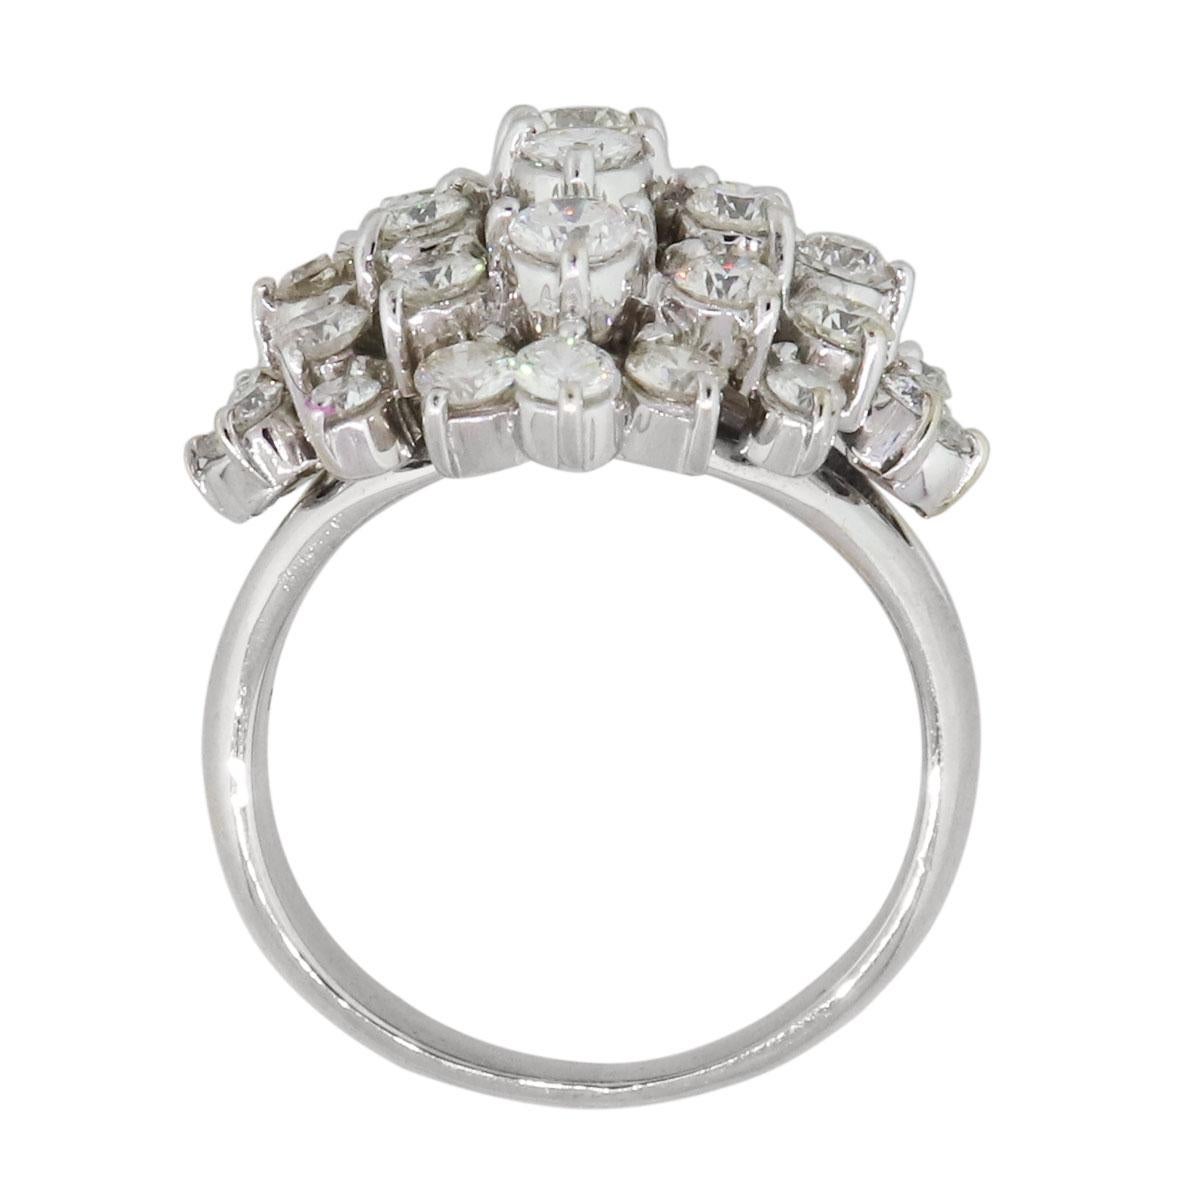 Material: 18k white gold
Diamond Details: Approximately 2.50ctw of round brilliant diamonds, 34 stones. Diamonds are G/H in color and VS in clarity
Ring Size: 6.75 (can be sized)
Ring Measurements: 1.04″ x 0.87″ x 0.83″
Total Weight: 9.9g